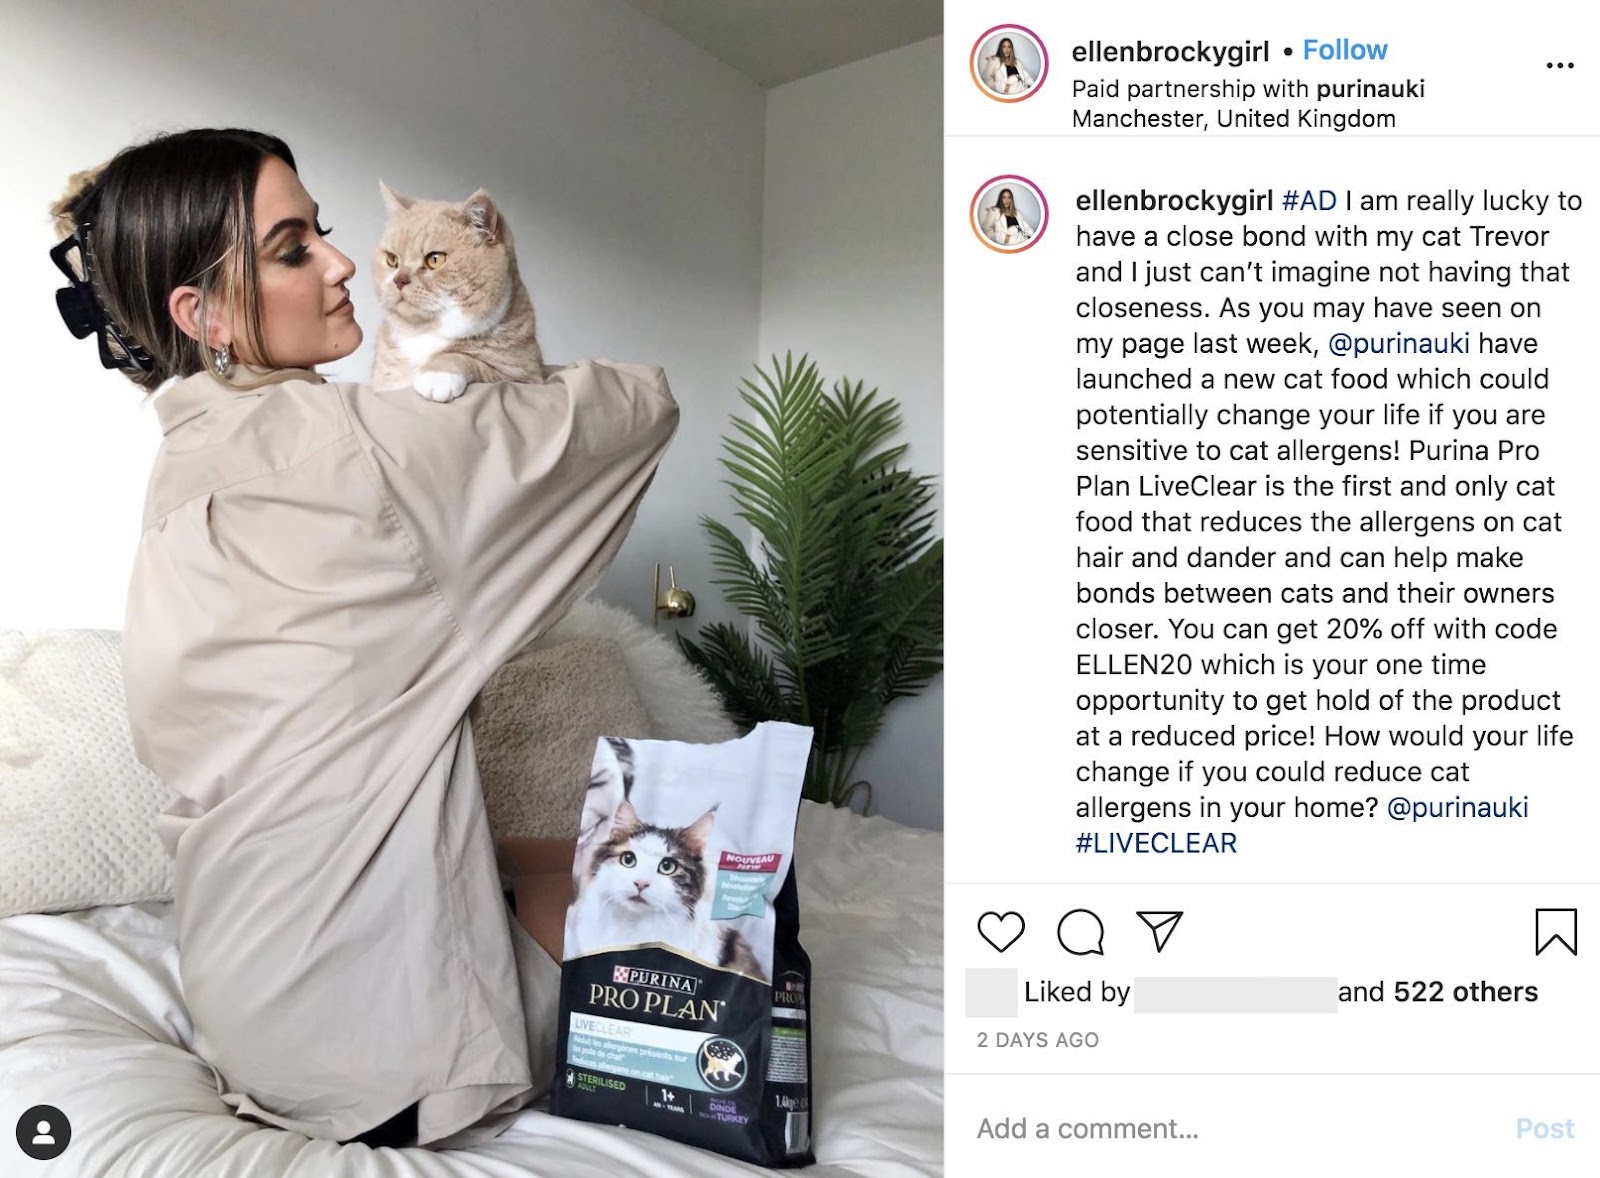 Influencer marketing example by Purina who have collaborated with Ellen Brock to create a sponsored post on Instagram.